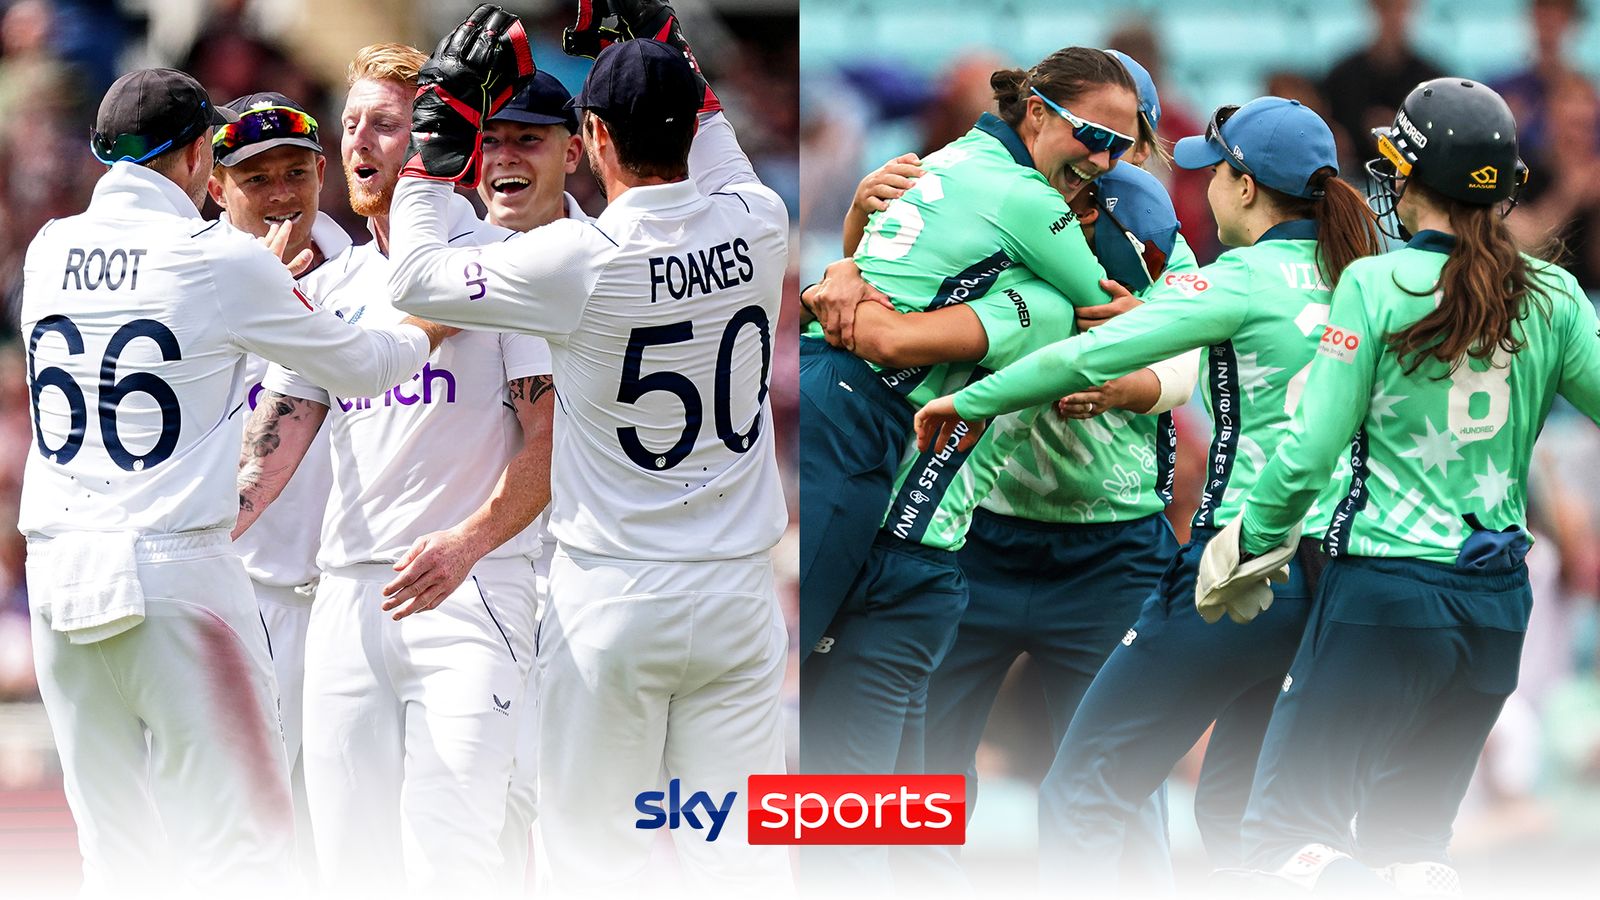 Sky Sports and ECB extend partnership to 2028 in new four-year agreement